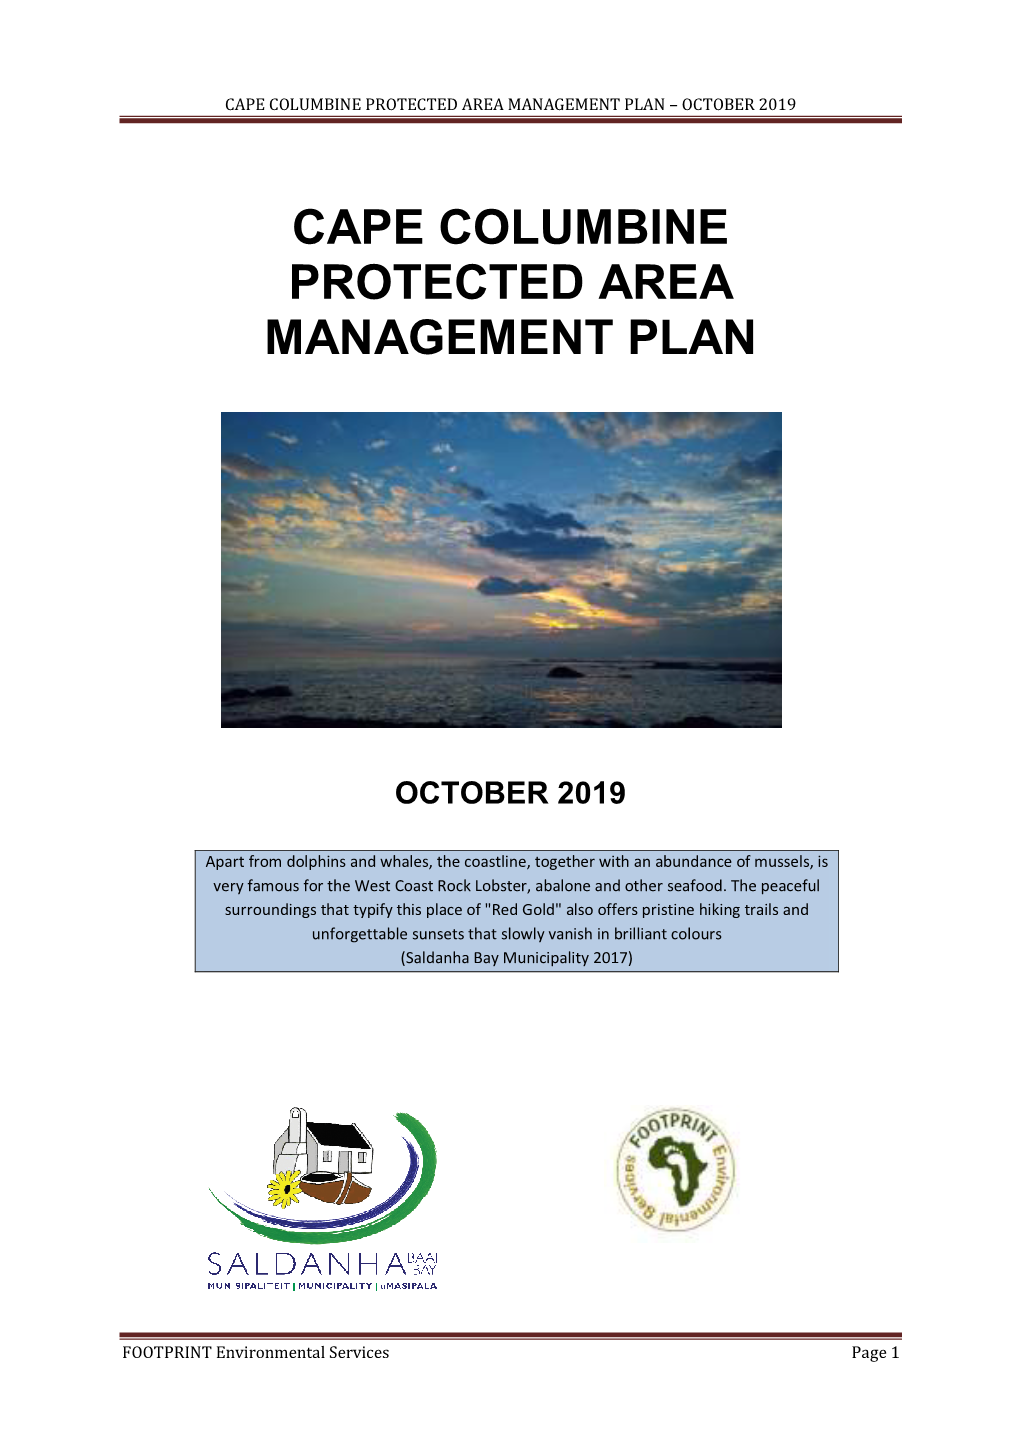 Cape Columbine Protected Area Management Plan – October 2019